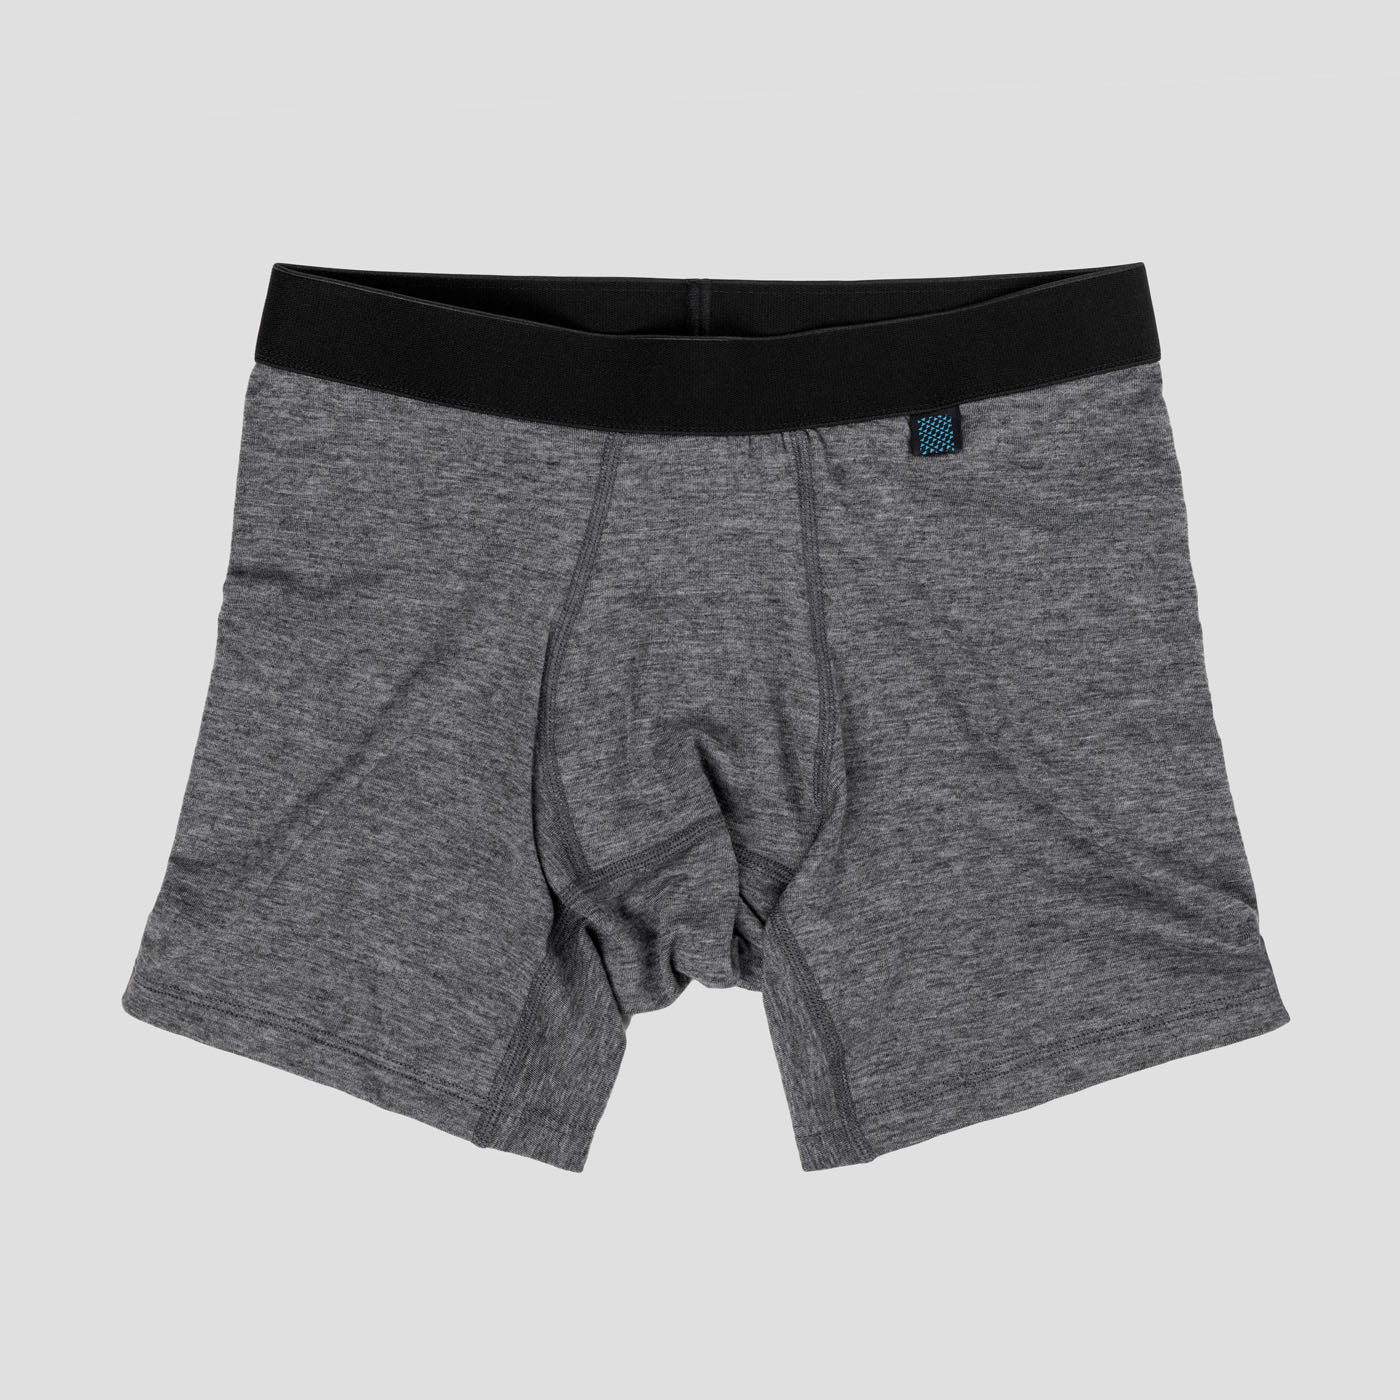 Boys Large YLG Under Armour Grey Boxer Briefs